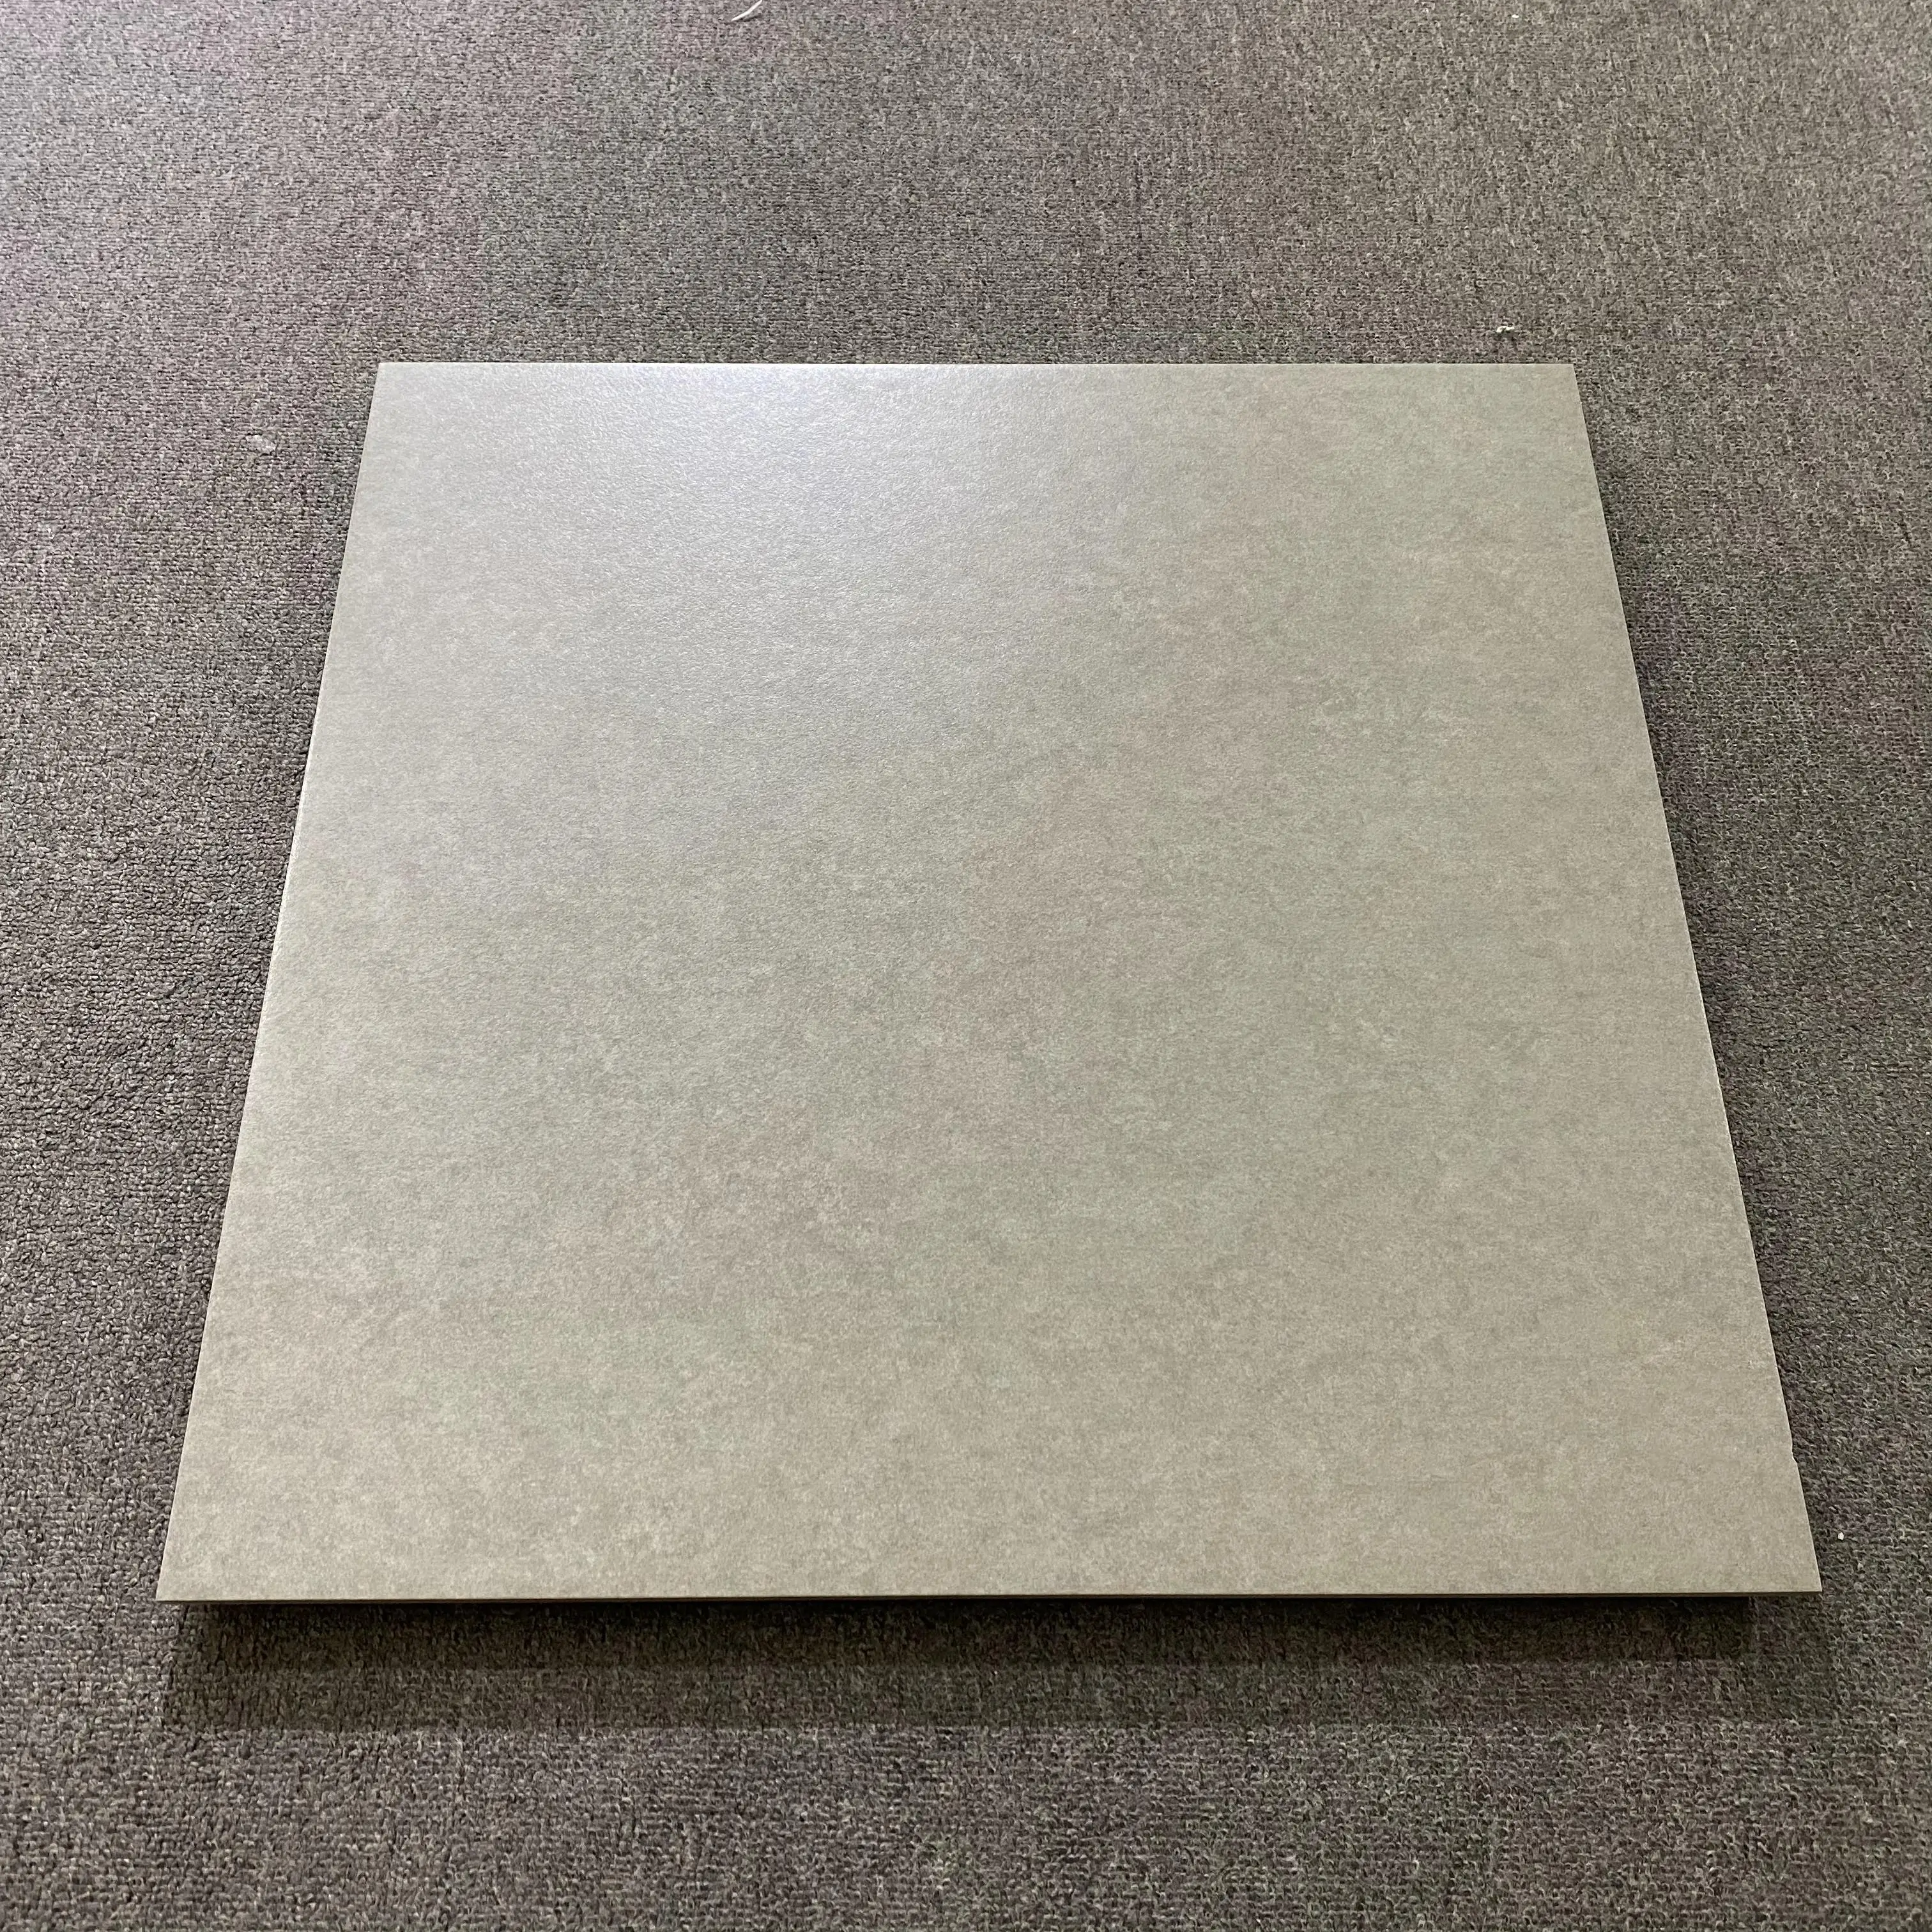 Chinese Factory Cheap Price Rustic Wall Glazed Ceramic Floor Tiles - Buy  Chinese Floor Tile,Floor Tile Porcelain,Discontinued Porcelain Floor Tile  Product on Alibaba.com